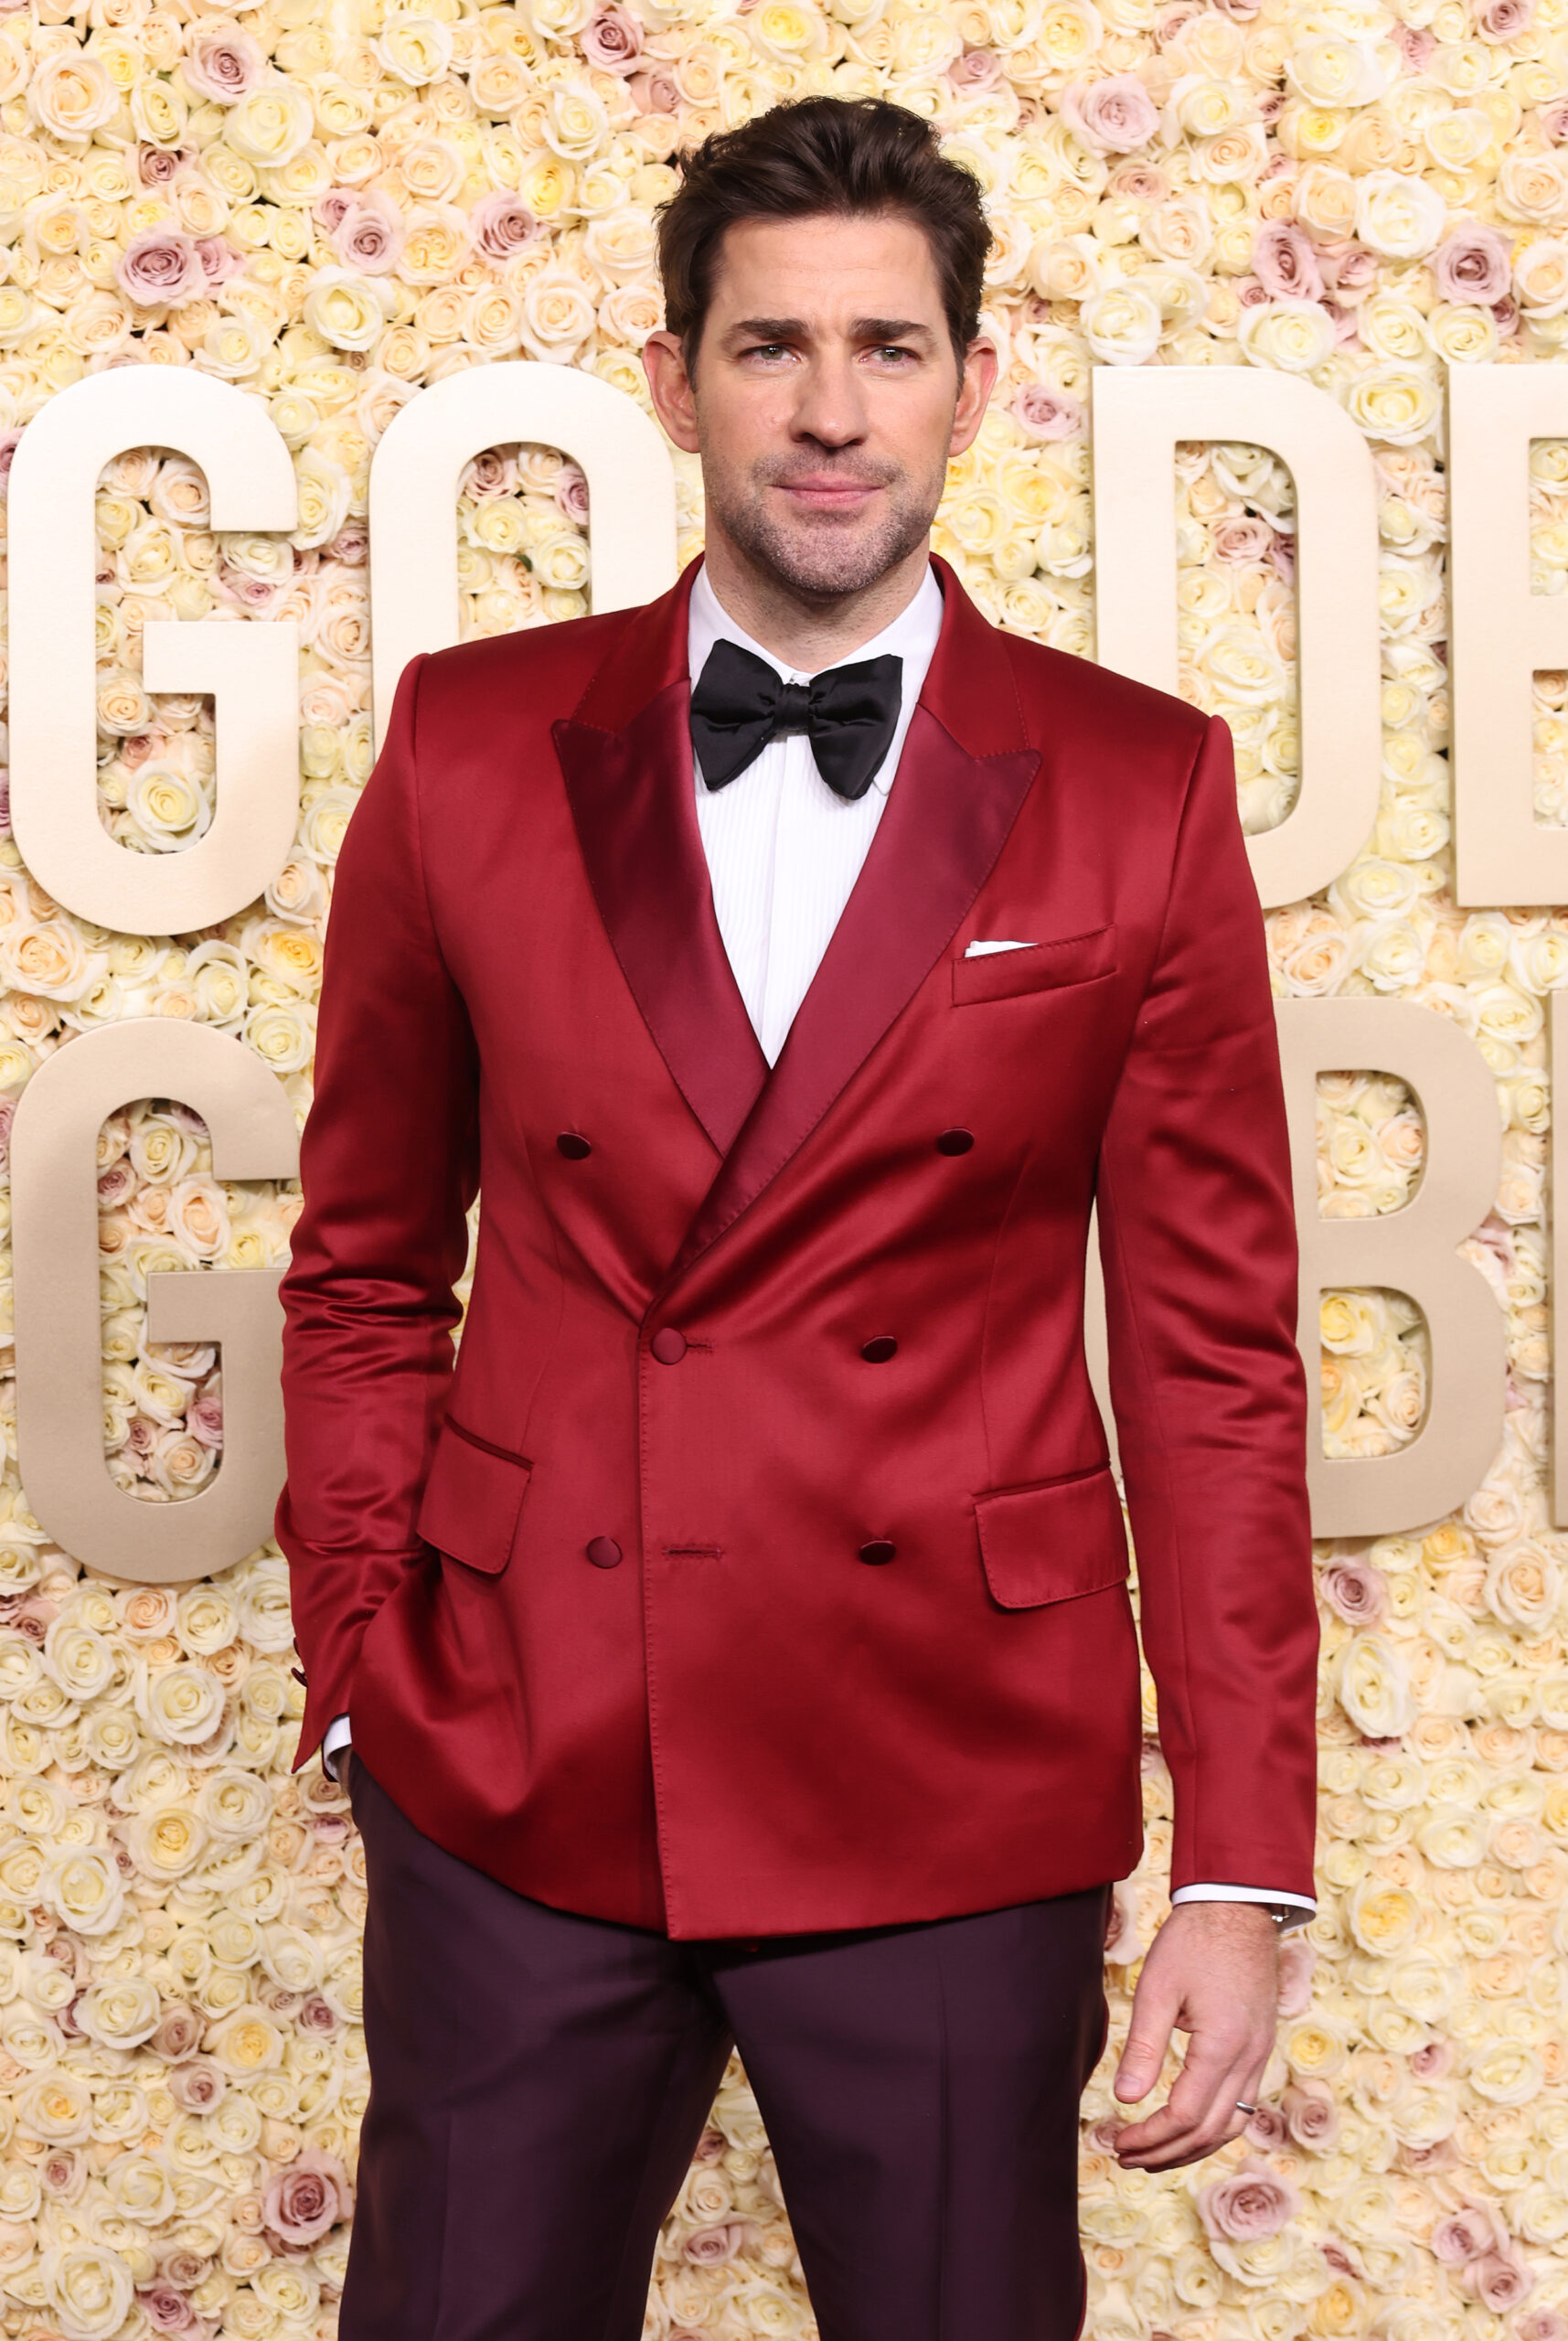 BEVERLY HILLS, CALIFORNIA - JANUARY 07: John Krasinski attends the 81st Annual Golden Globe Awards at The Beverly Hilton on January 07, 2024 in Beverly Hills, California. (Photo by Amy Sussman/Getty Images)